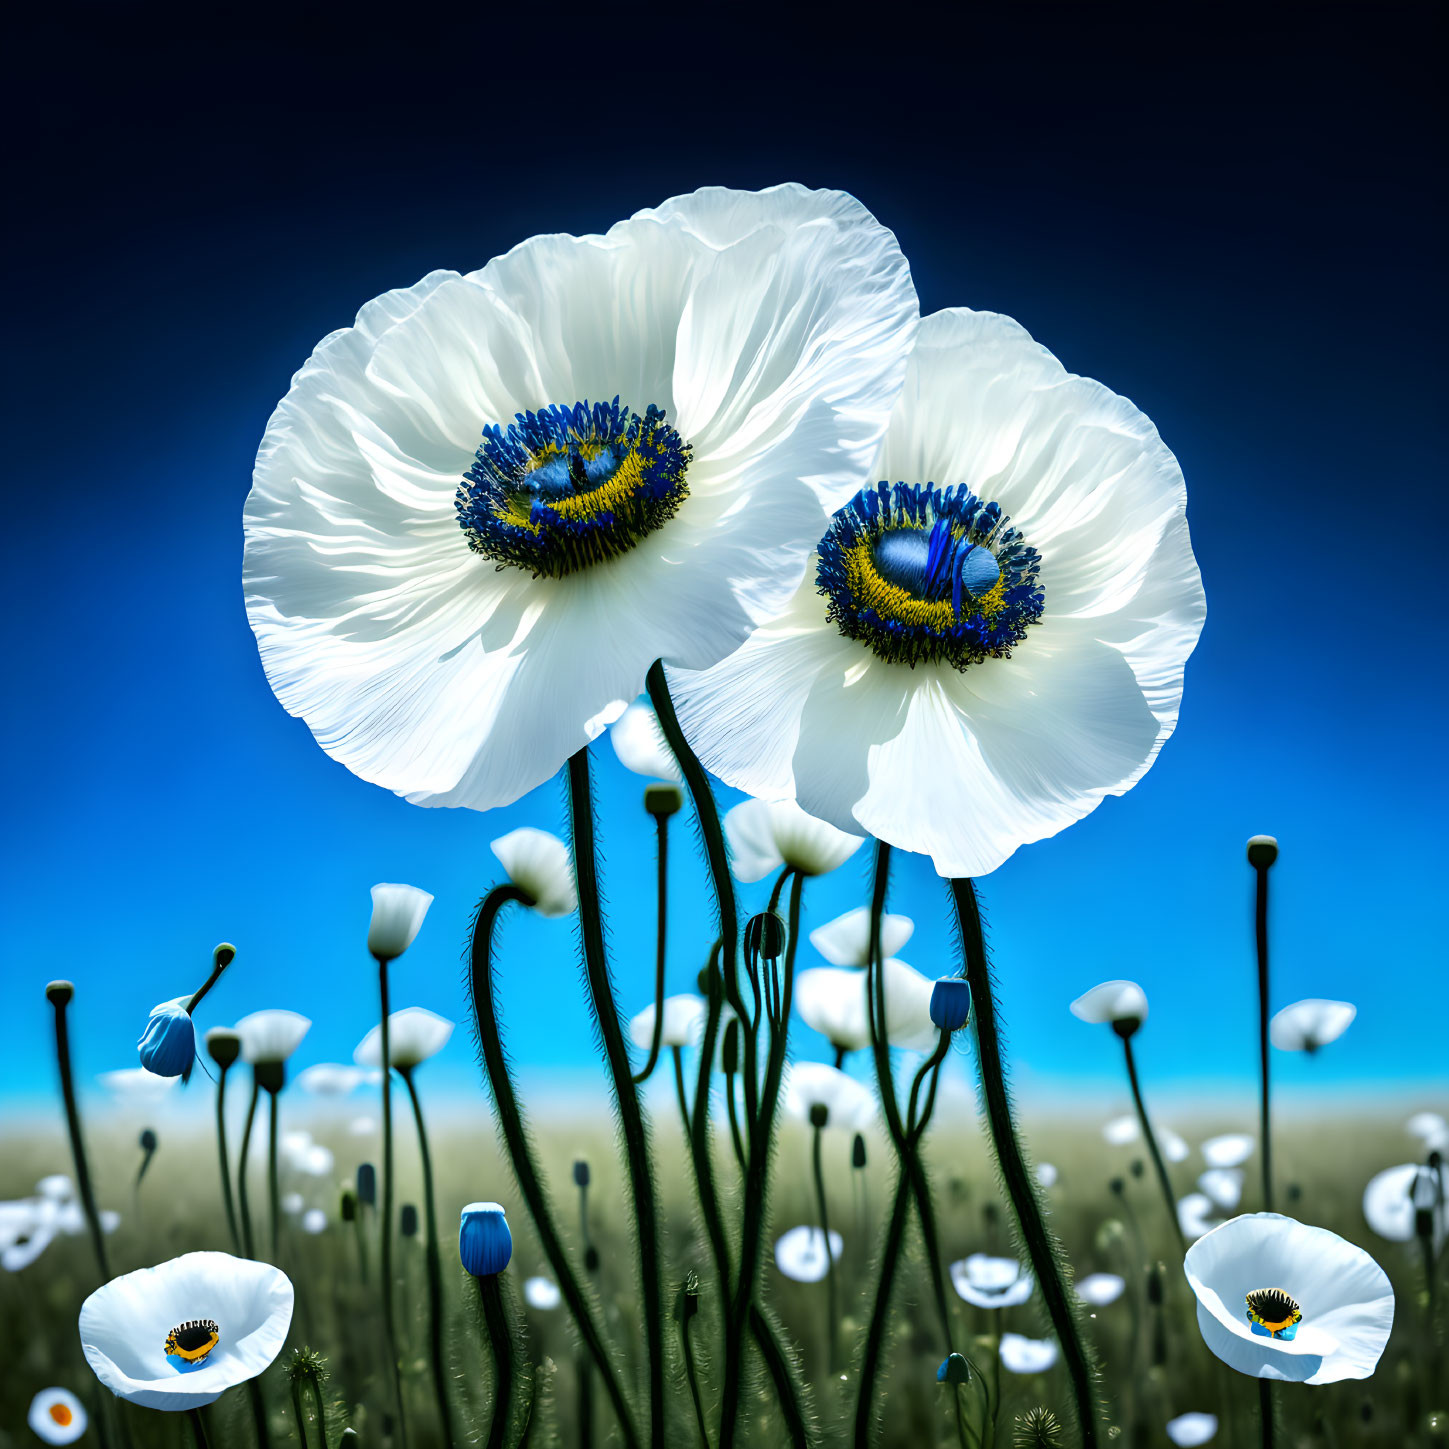 White Poppies in Blue and Green Field with Clear Sky and Small Blooms